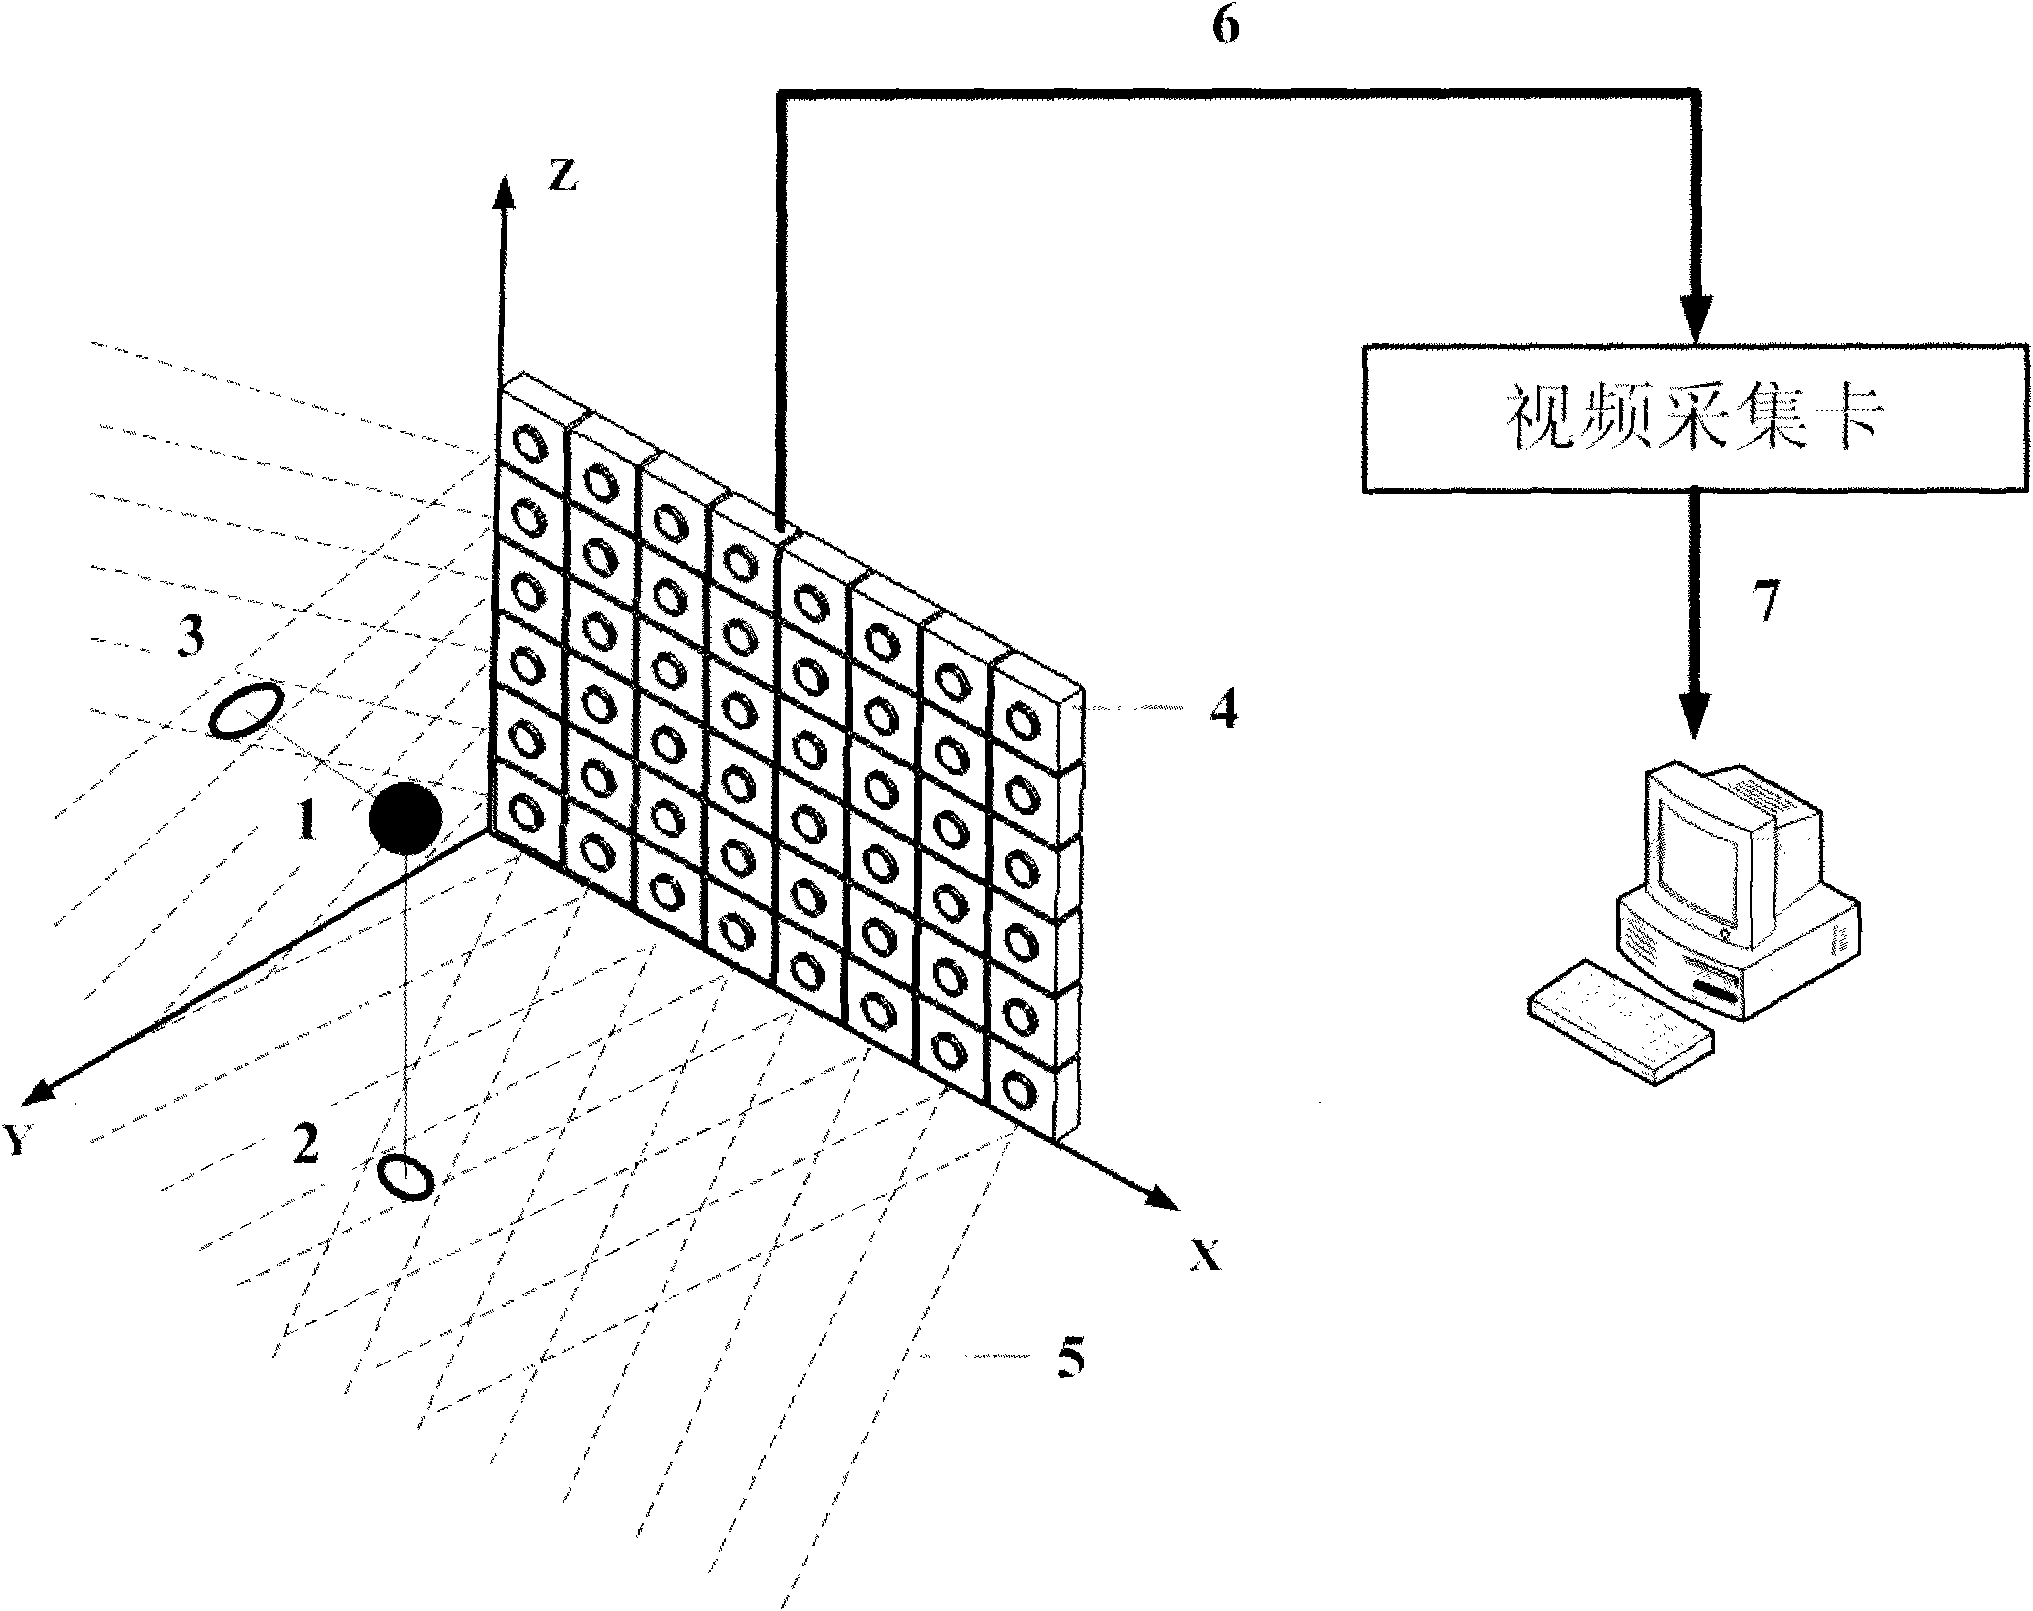 Non-visual geometric camera array video positioning method and system